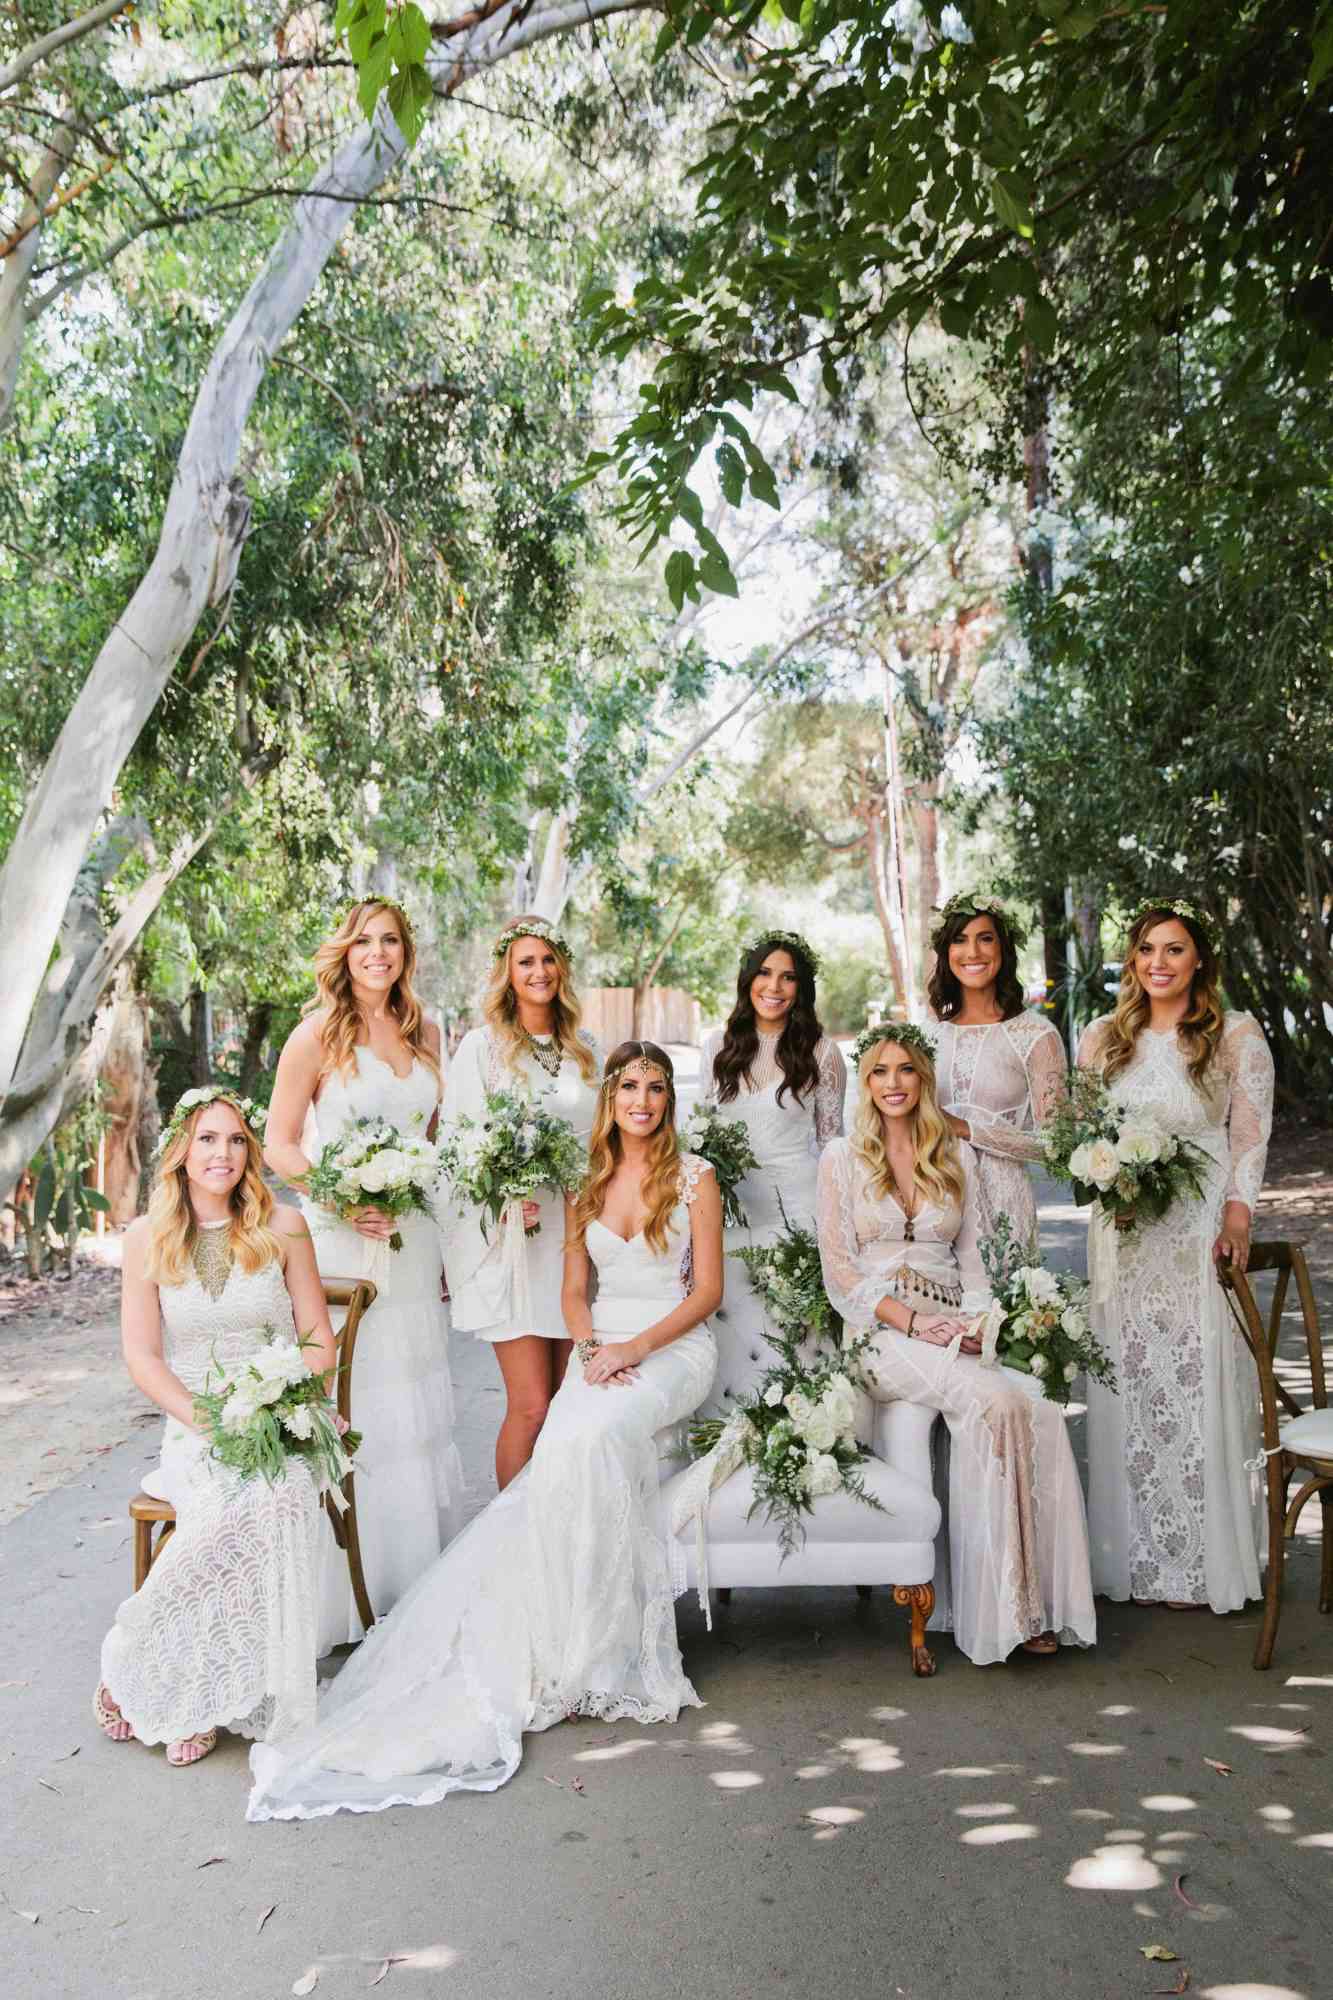 chic bridesmaids bohemian style gowns with flower crowns